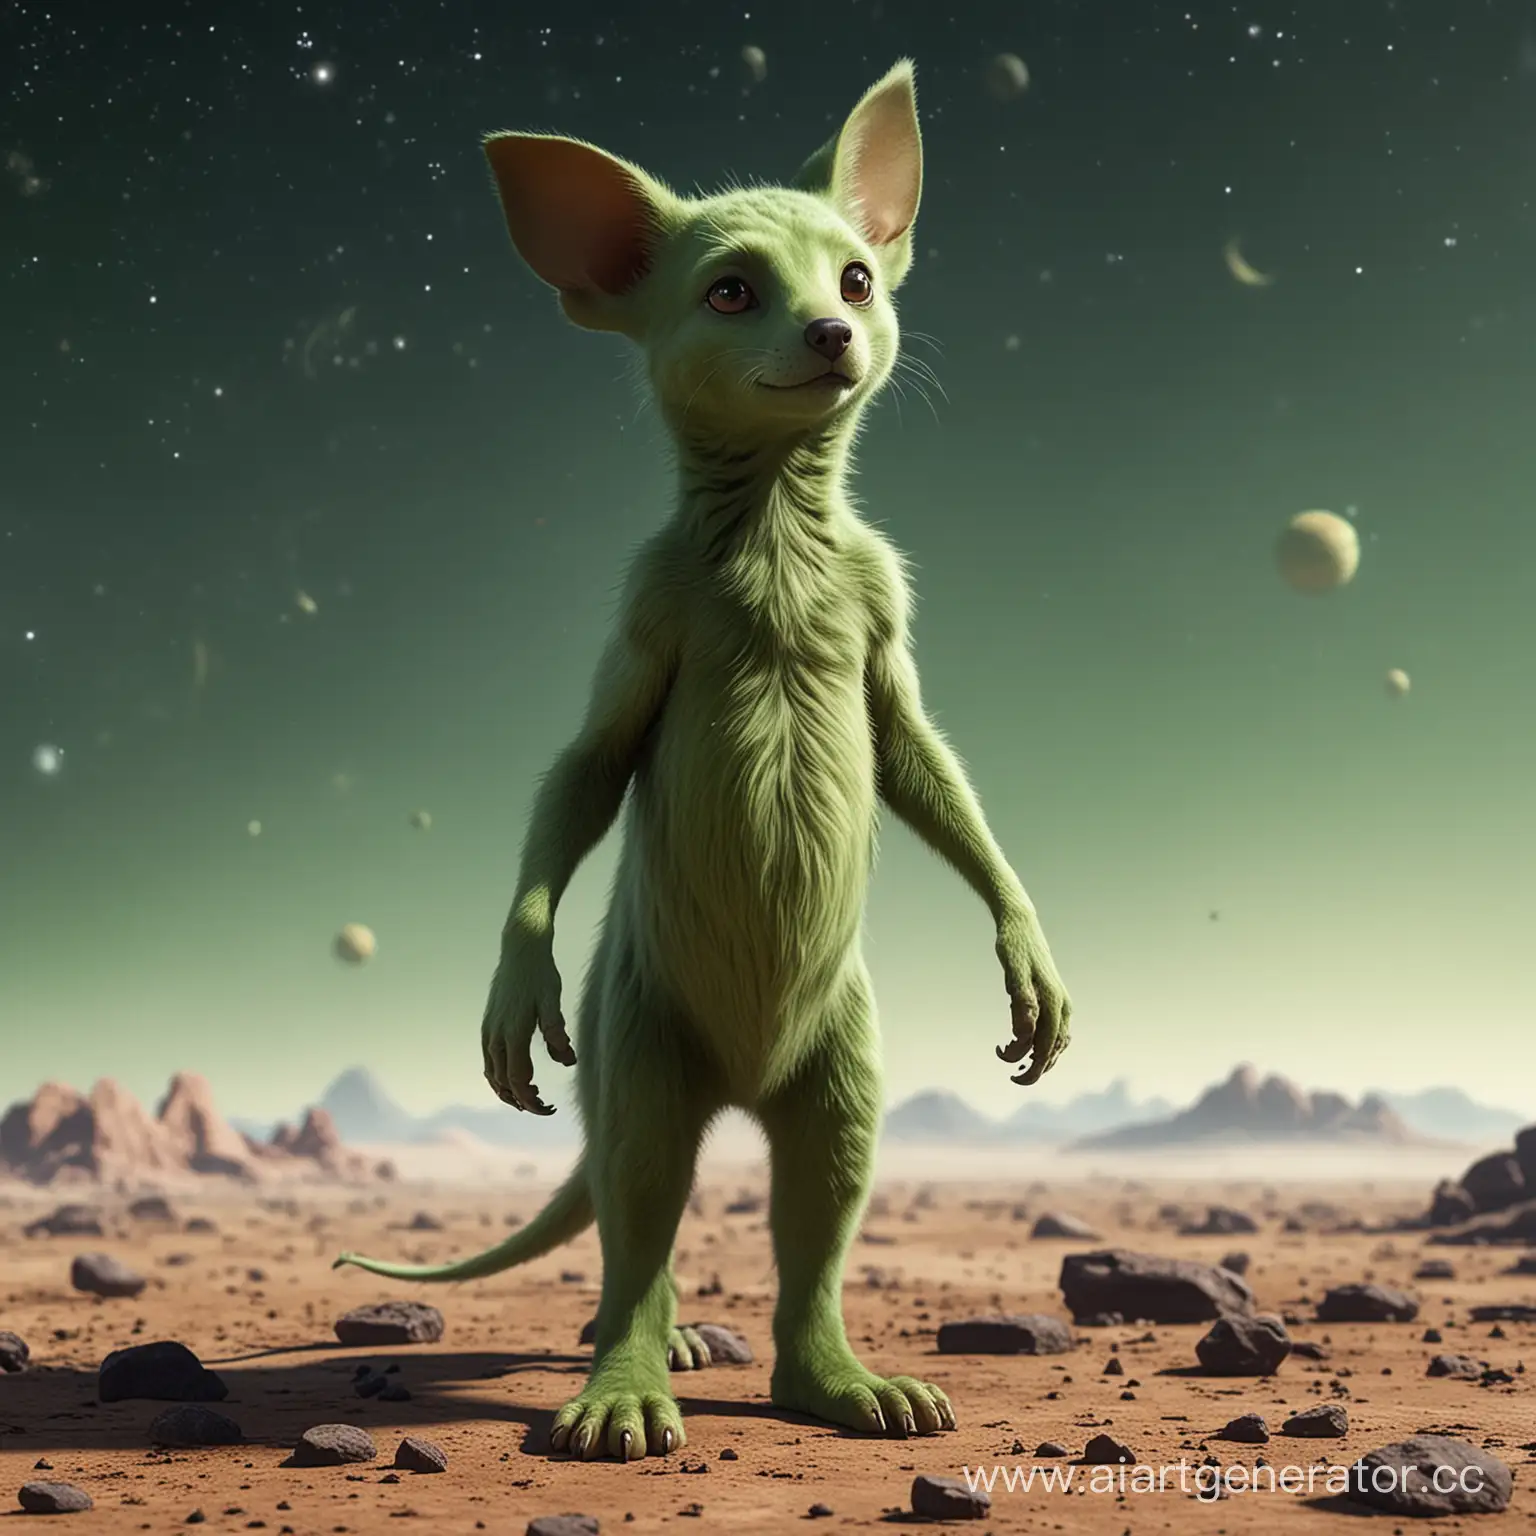 Green-Space-Creature-with-SausageLike-Limbs-on-Distant-Planets